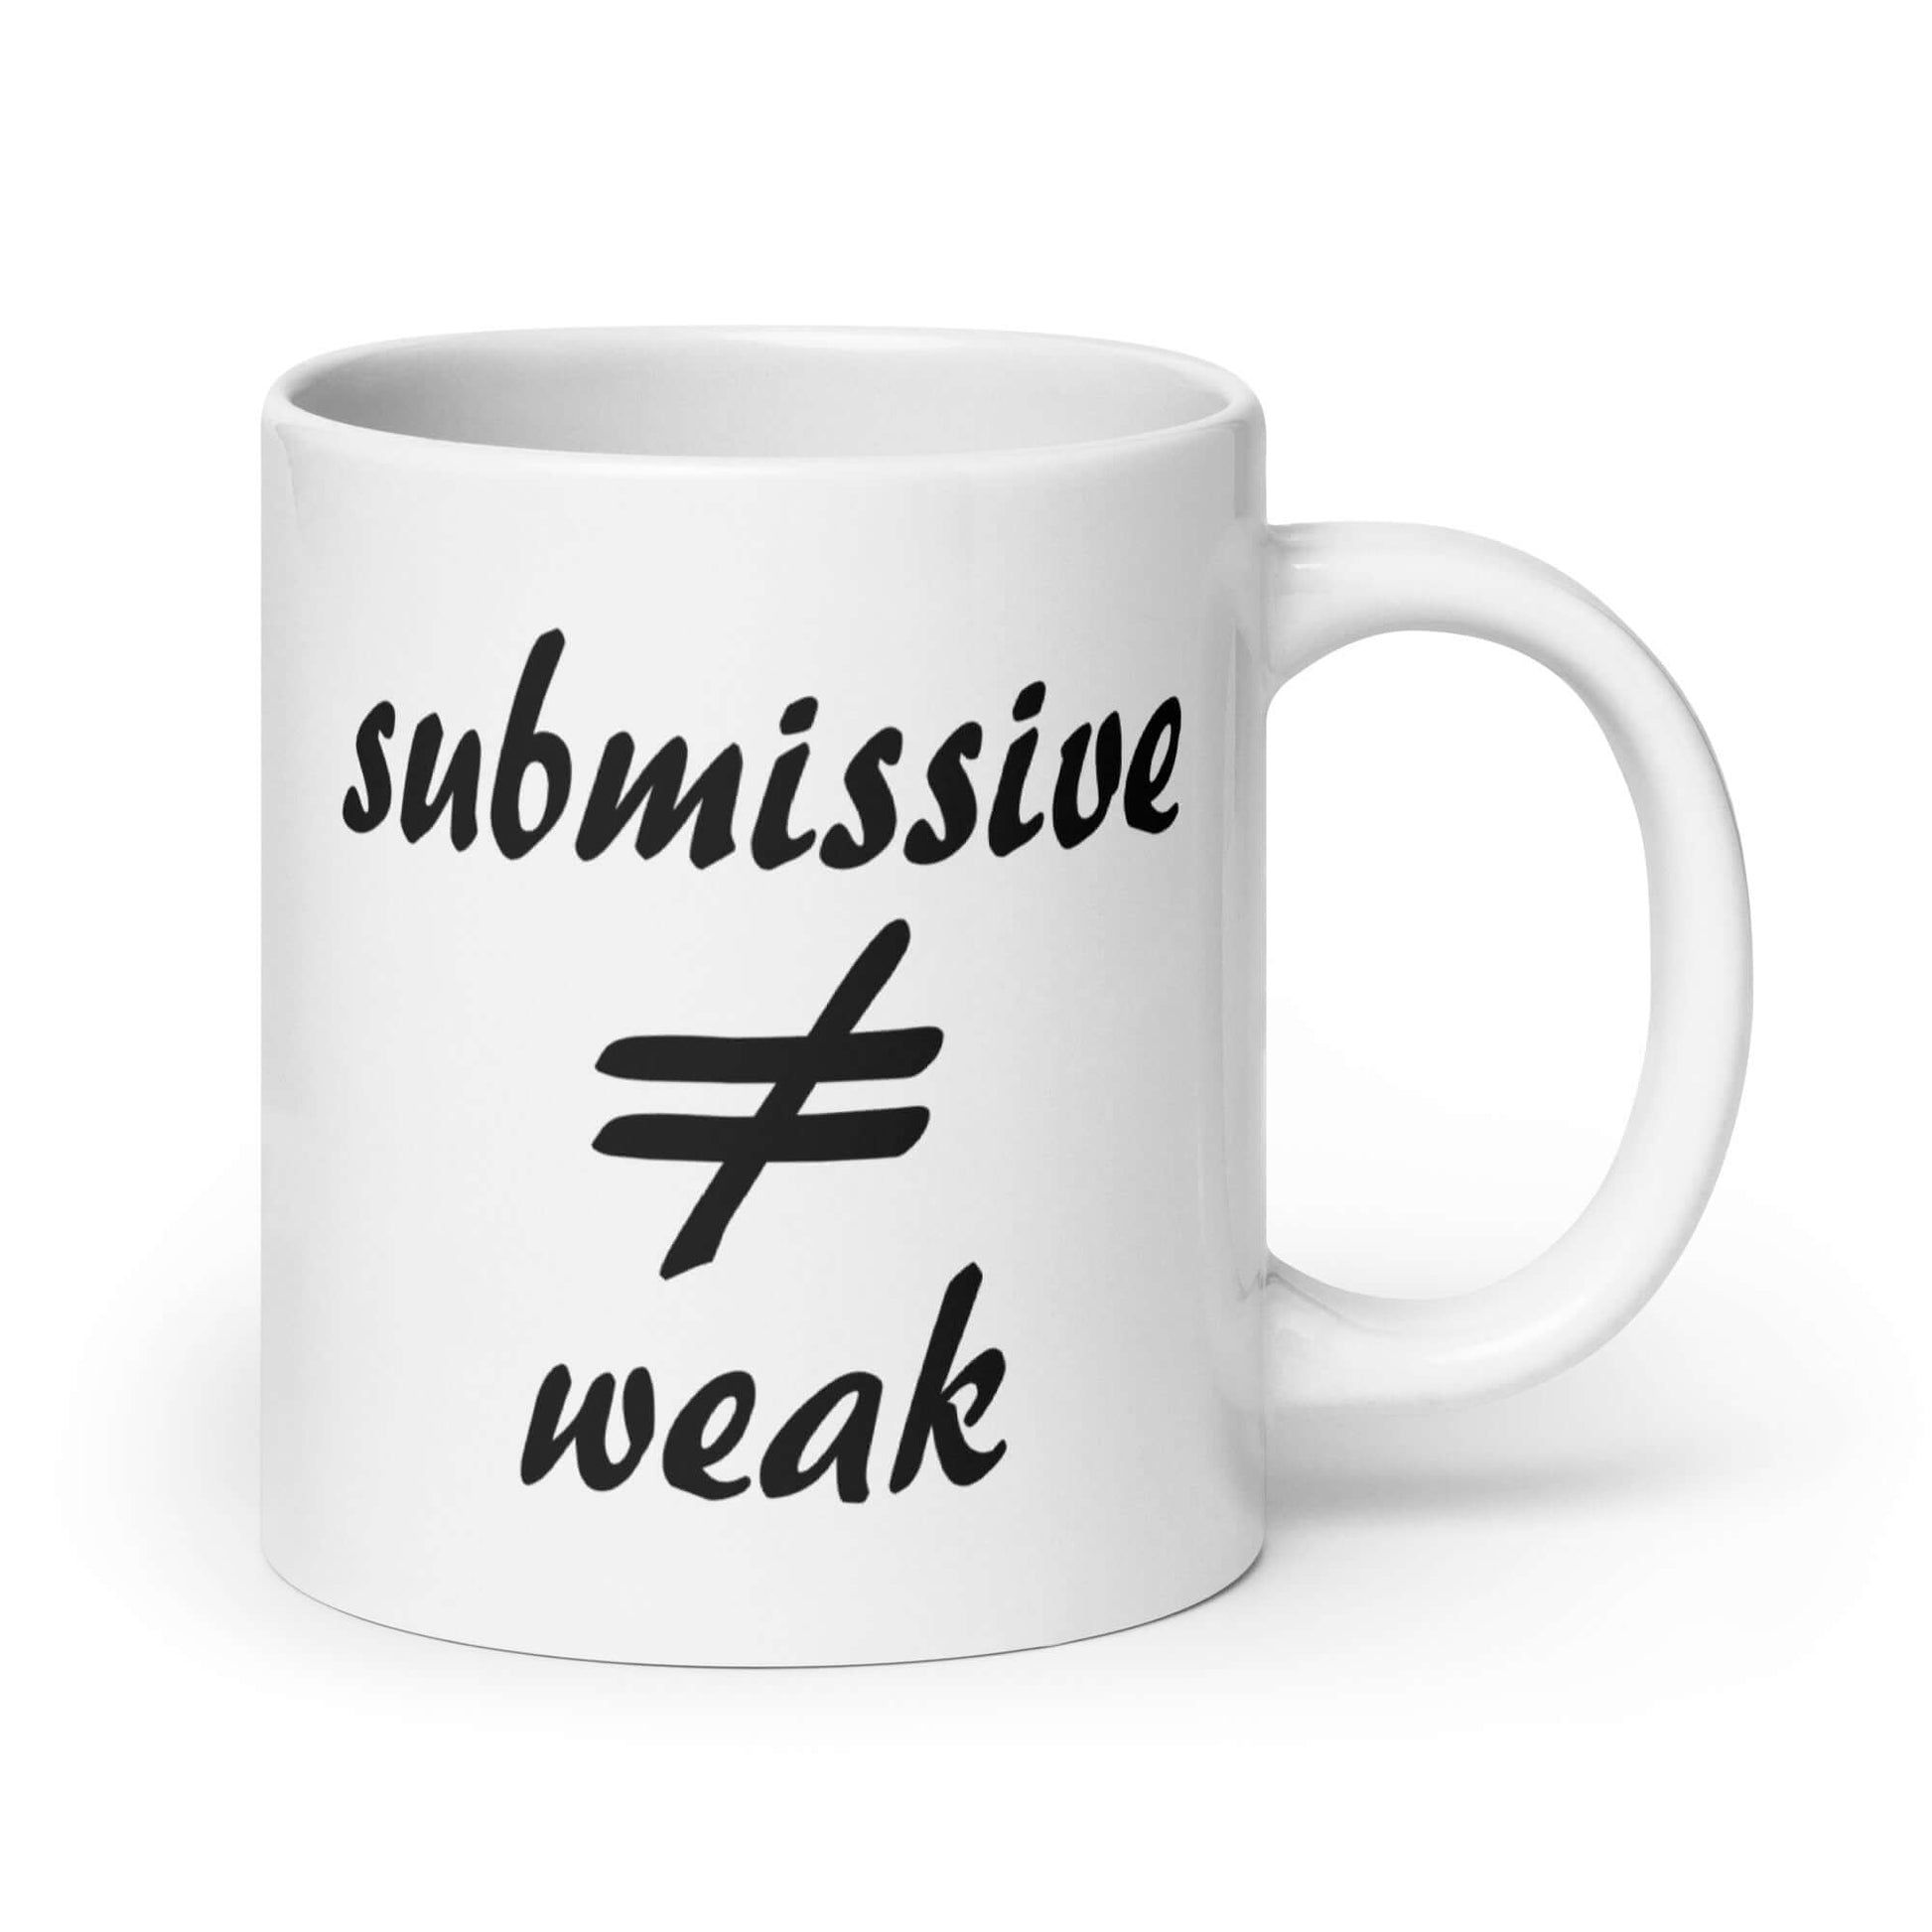 White ceramic coffee mug with the words submissive does not equal weak printed on both sides.